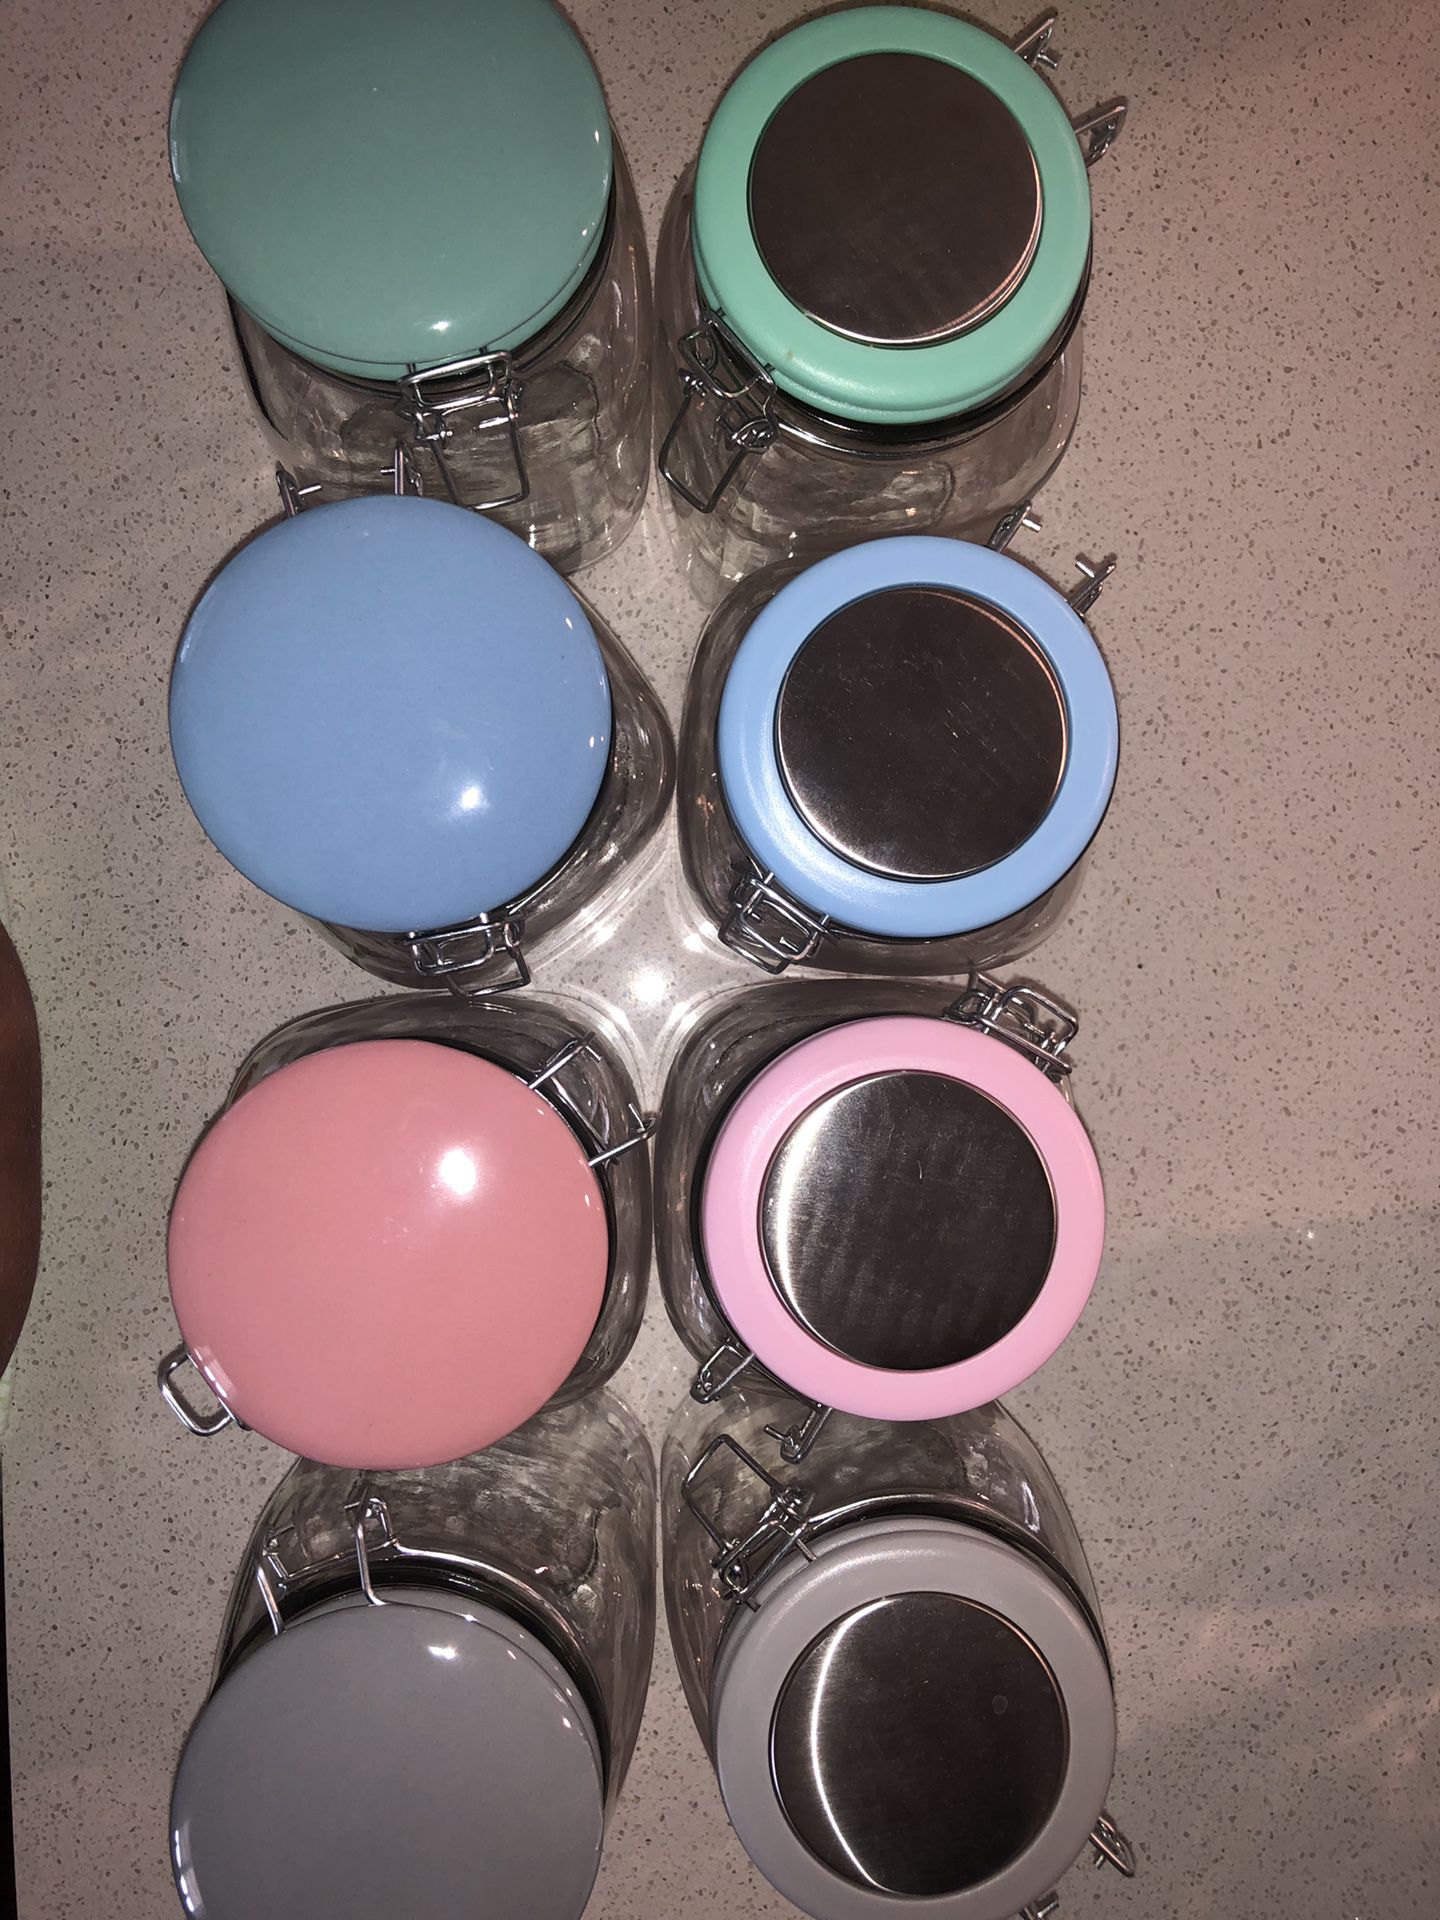 Large jars with colored lids